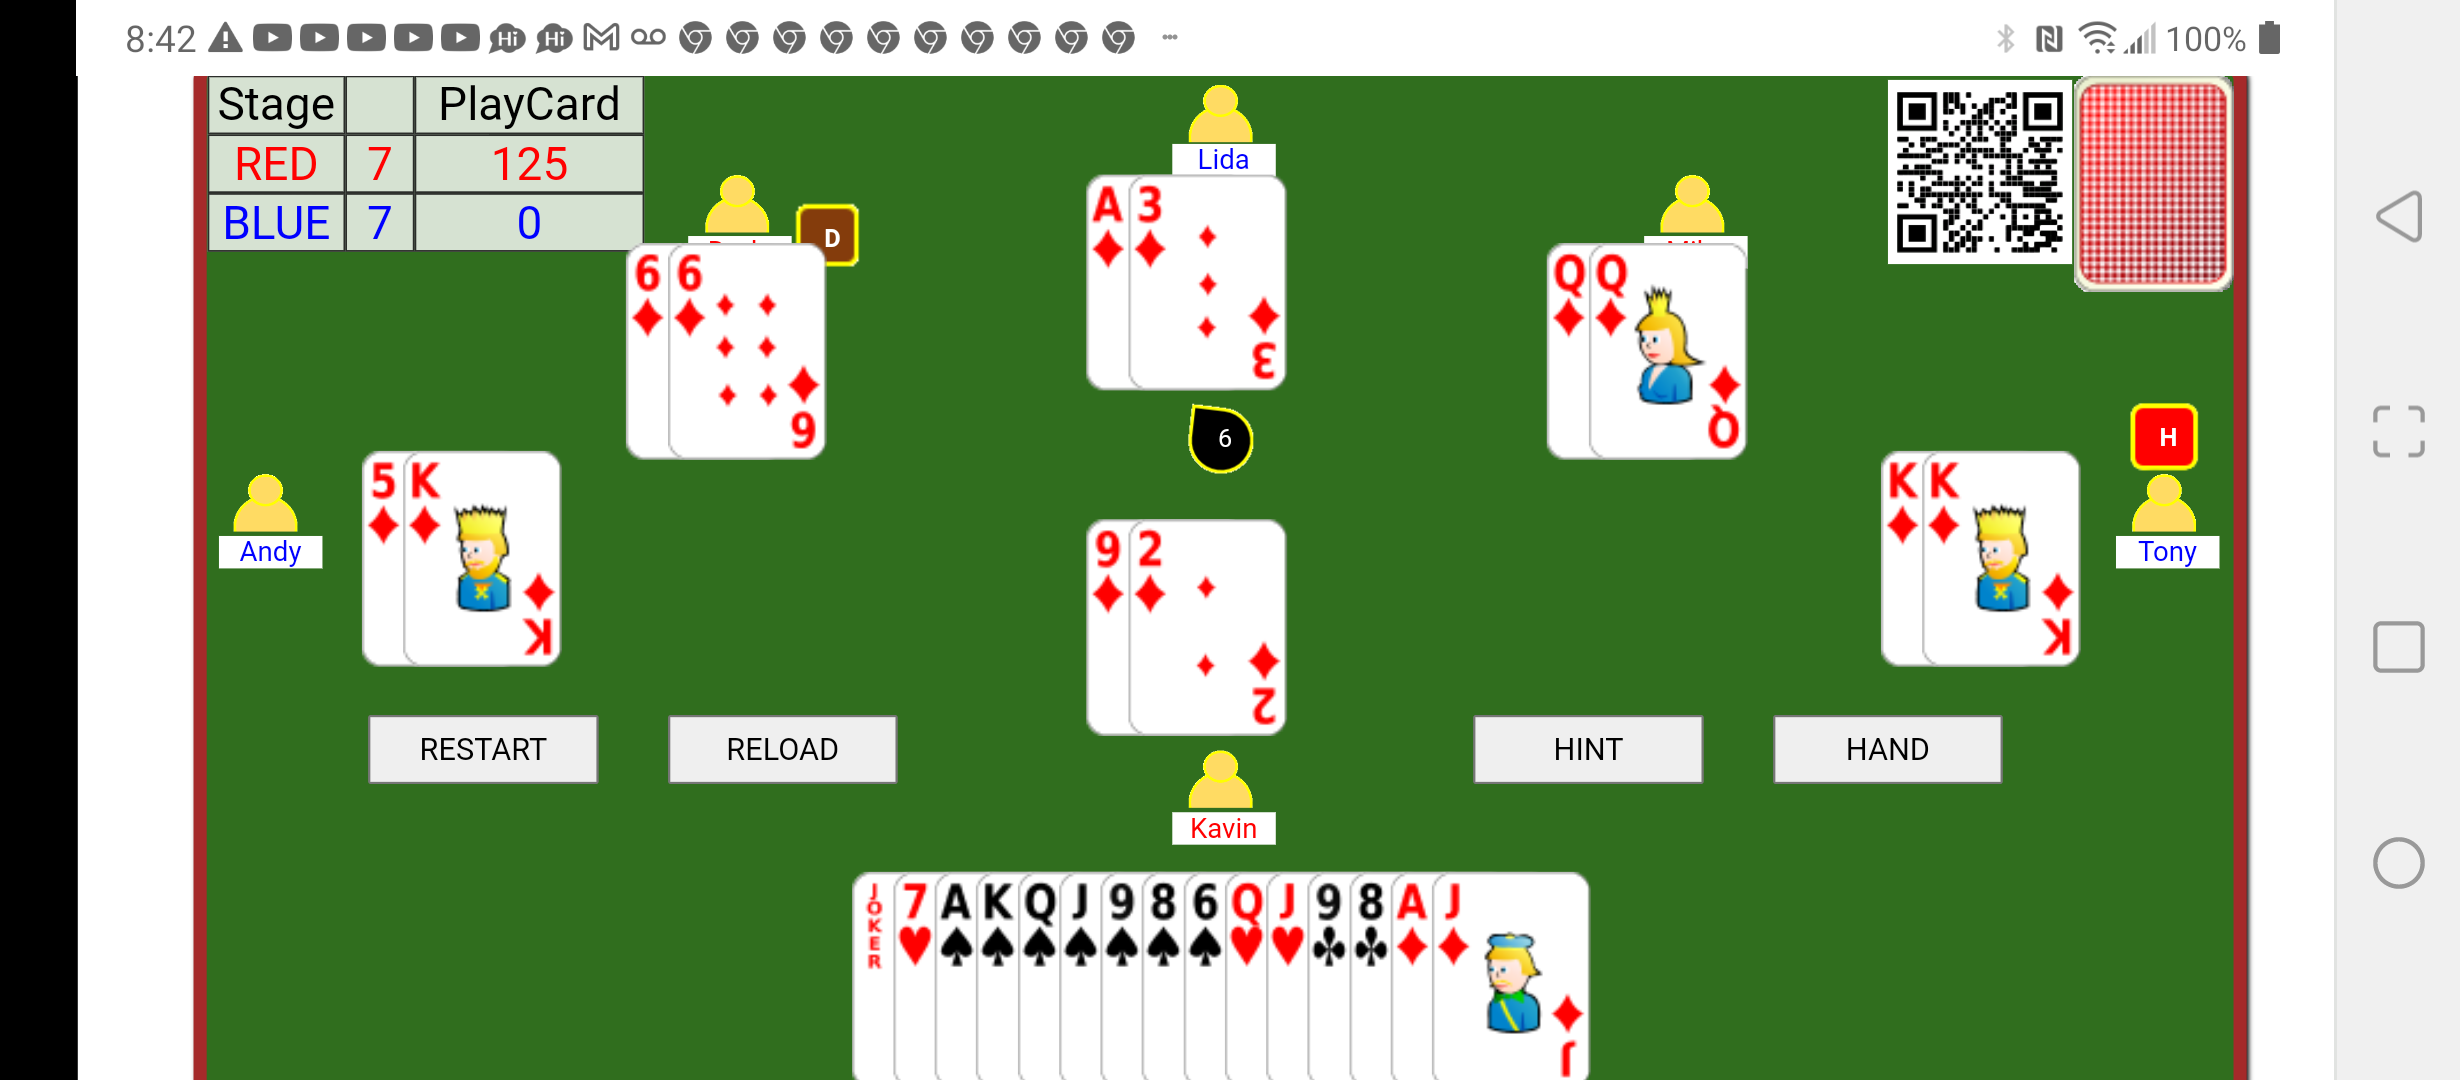 html5 tractor card game Screenshot_20220116-084254.png